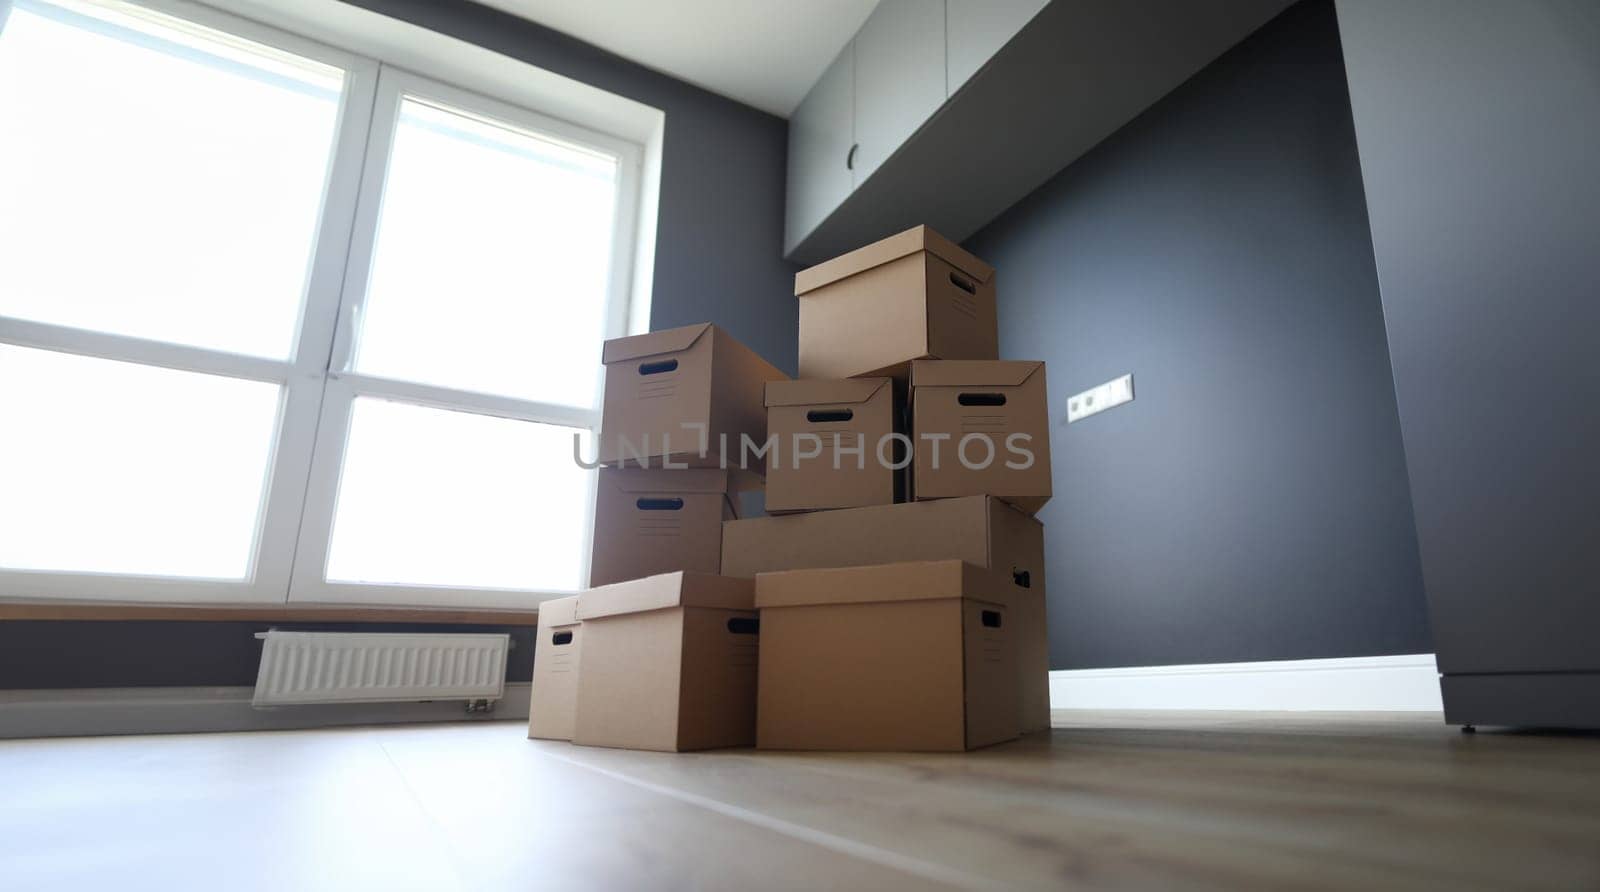 Lot of cardboard boxes on wooden floor new flat closeup by kuprevich